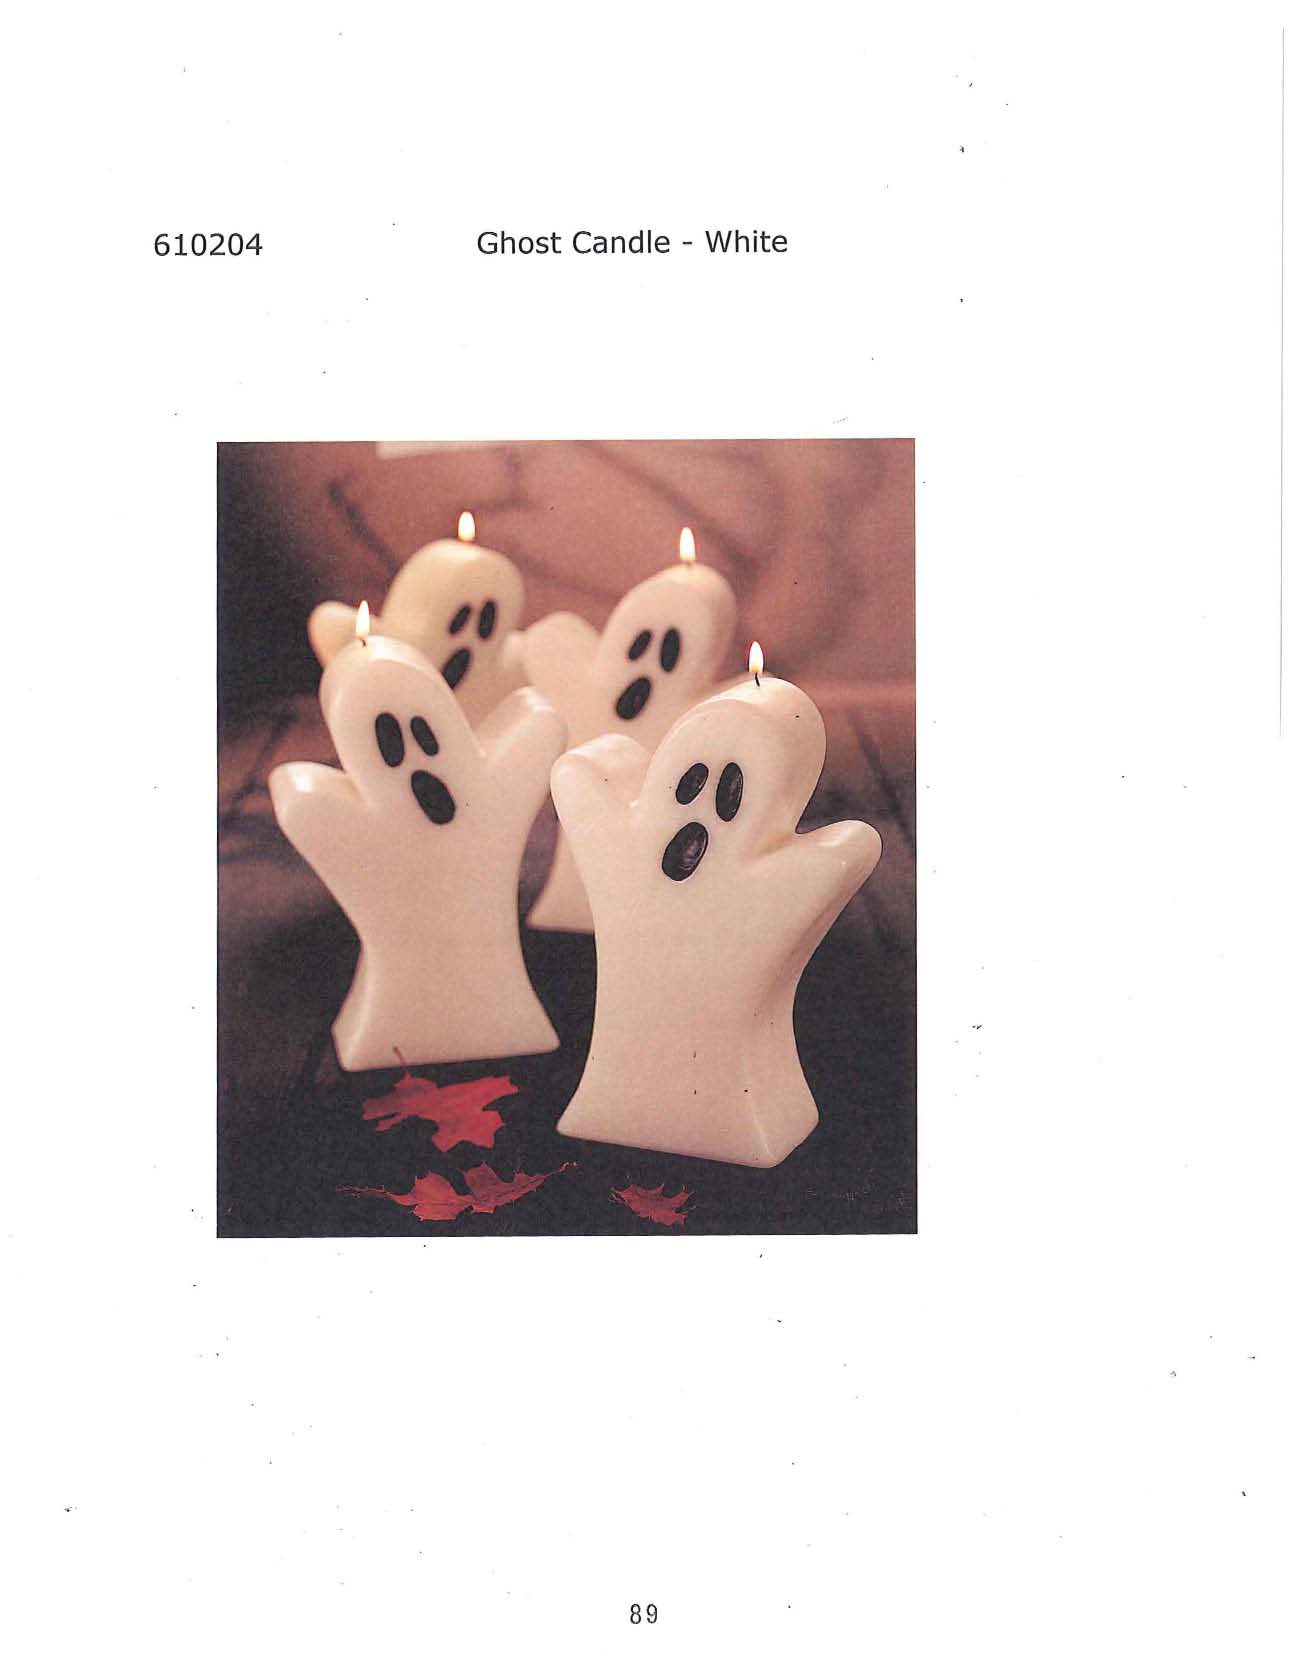 Ghost Candle - White